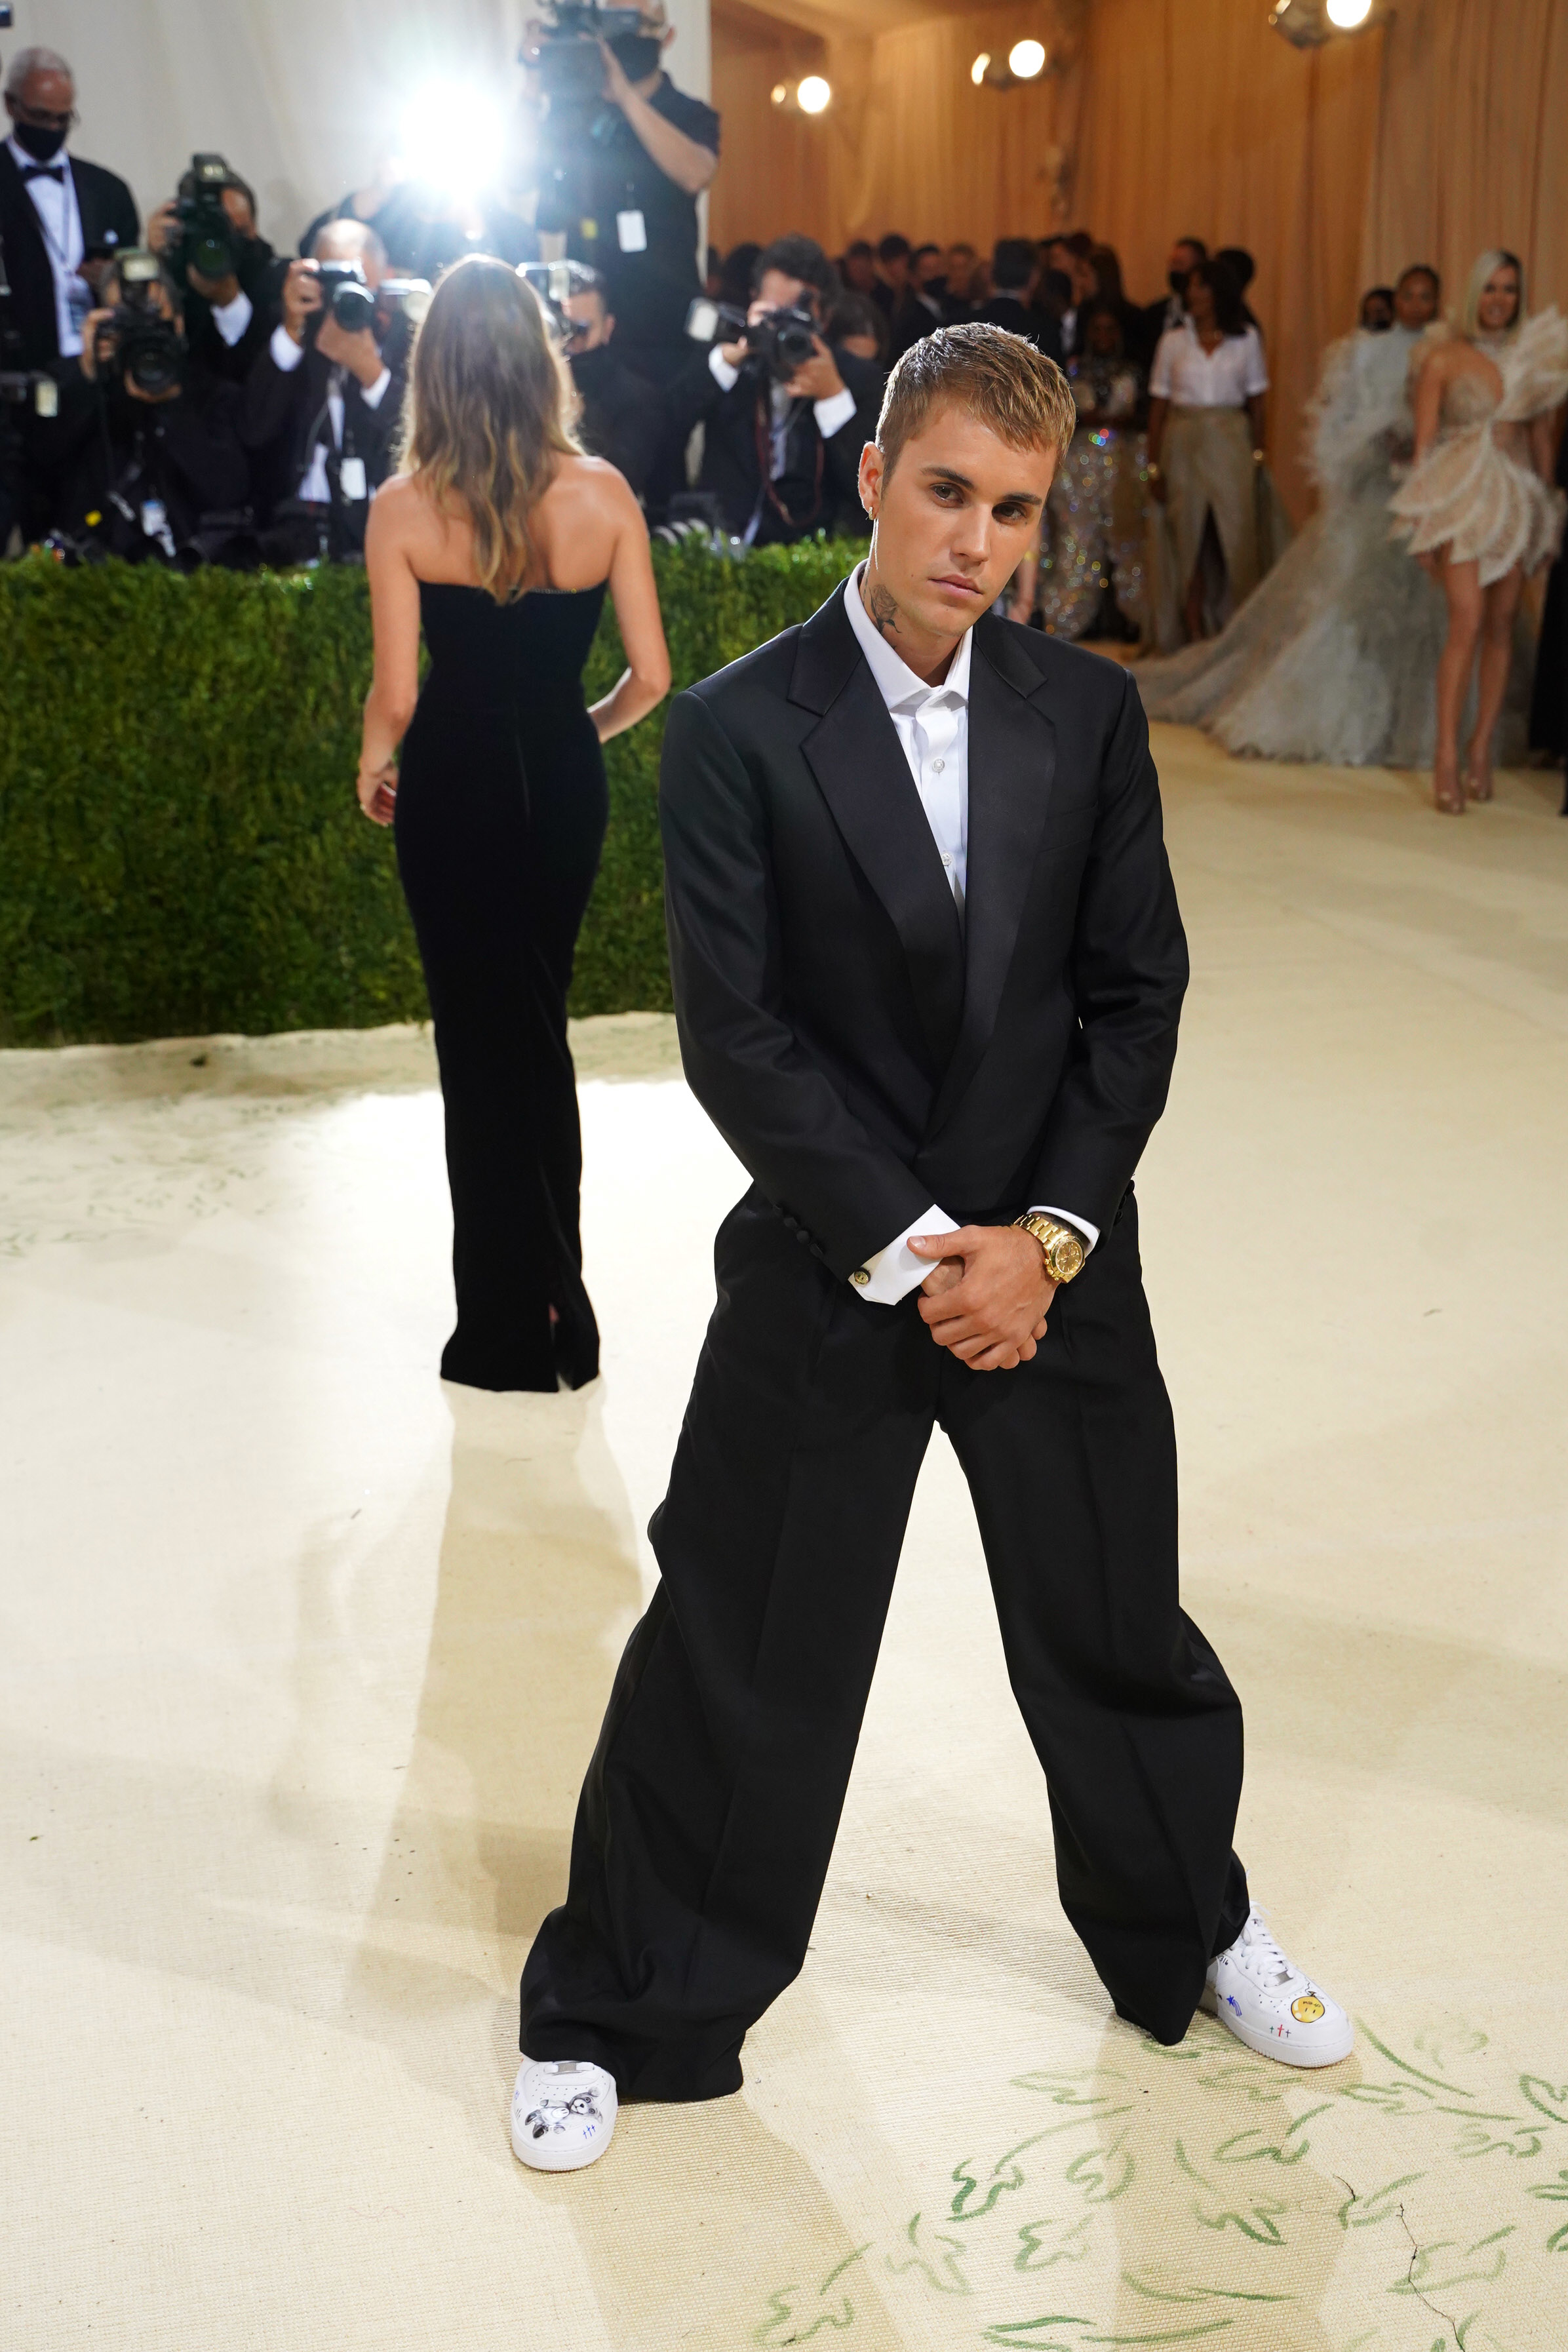 Justin Bieber in a classic black suit with bow tie, standing on a carpet, cameras in the background